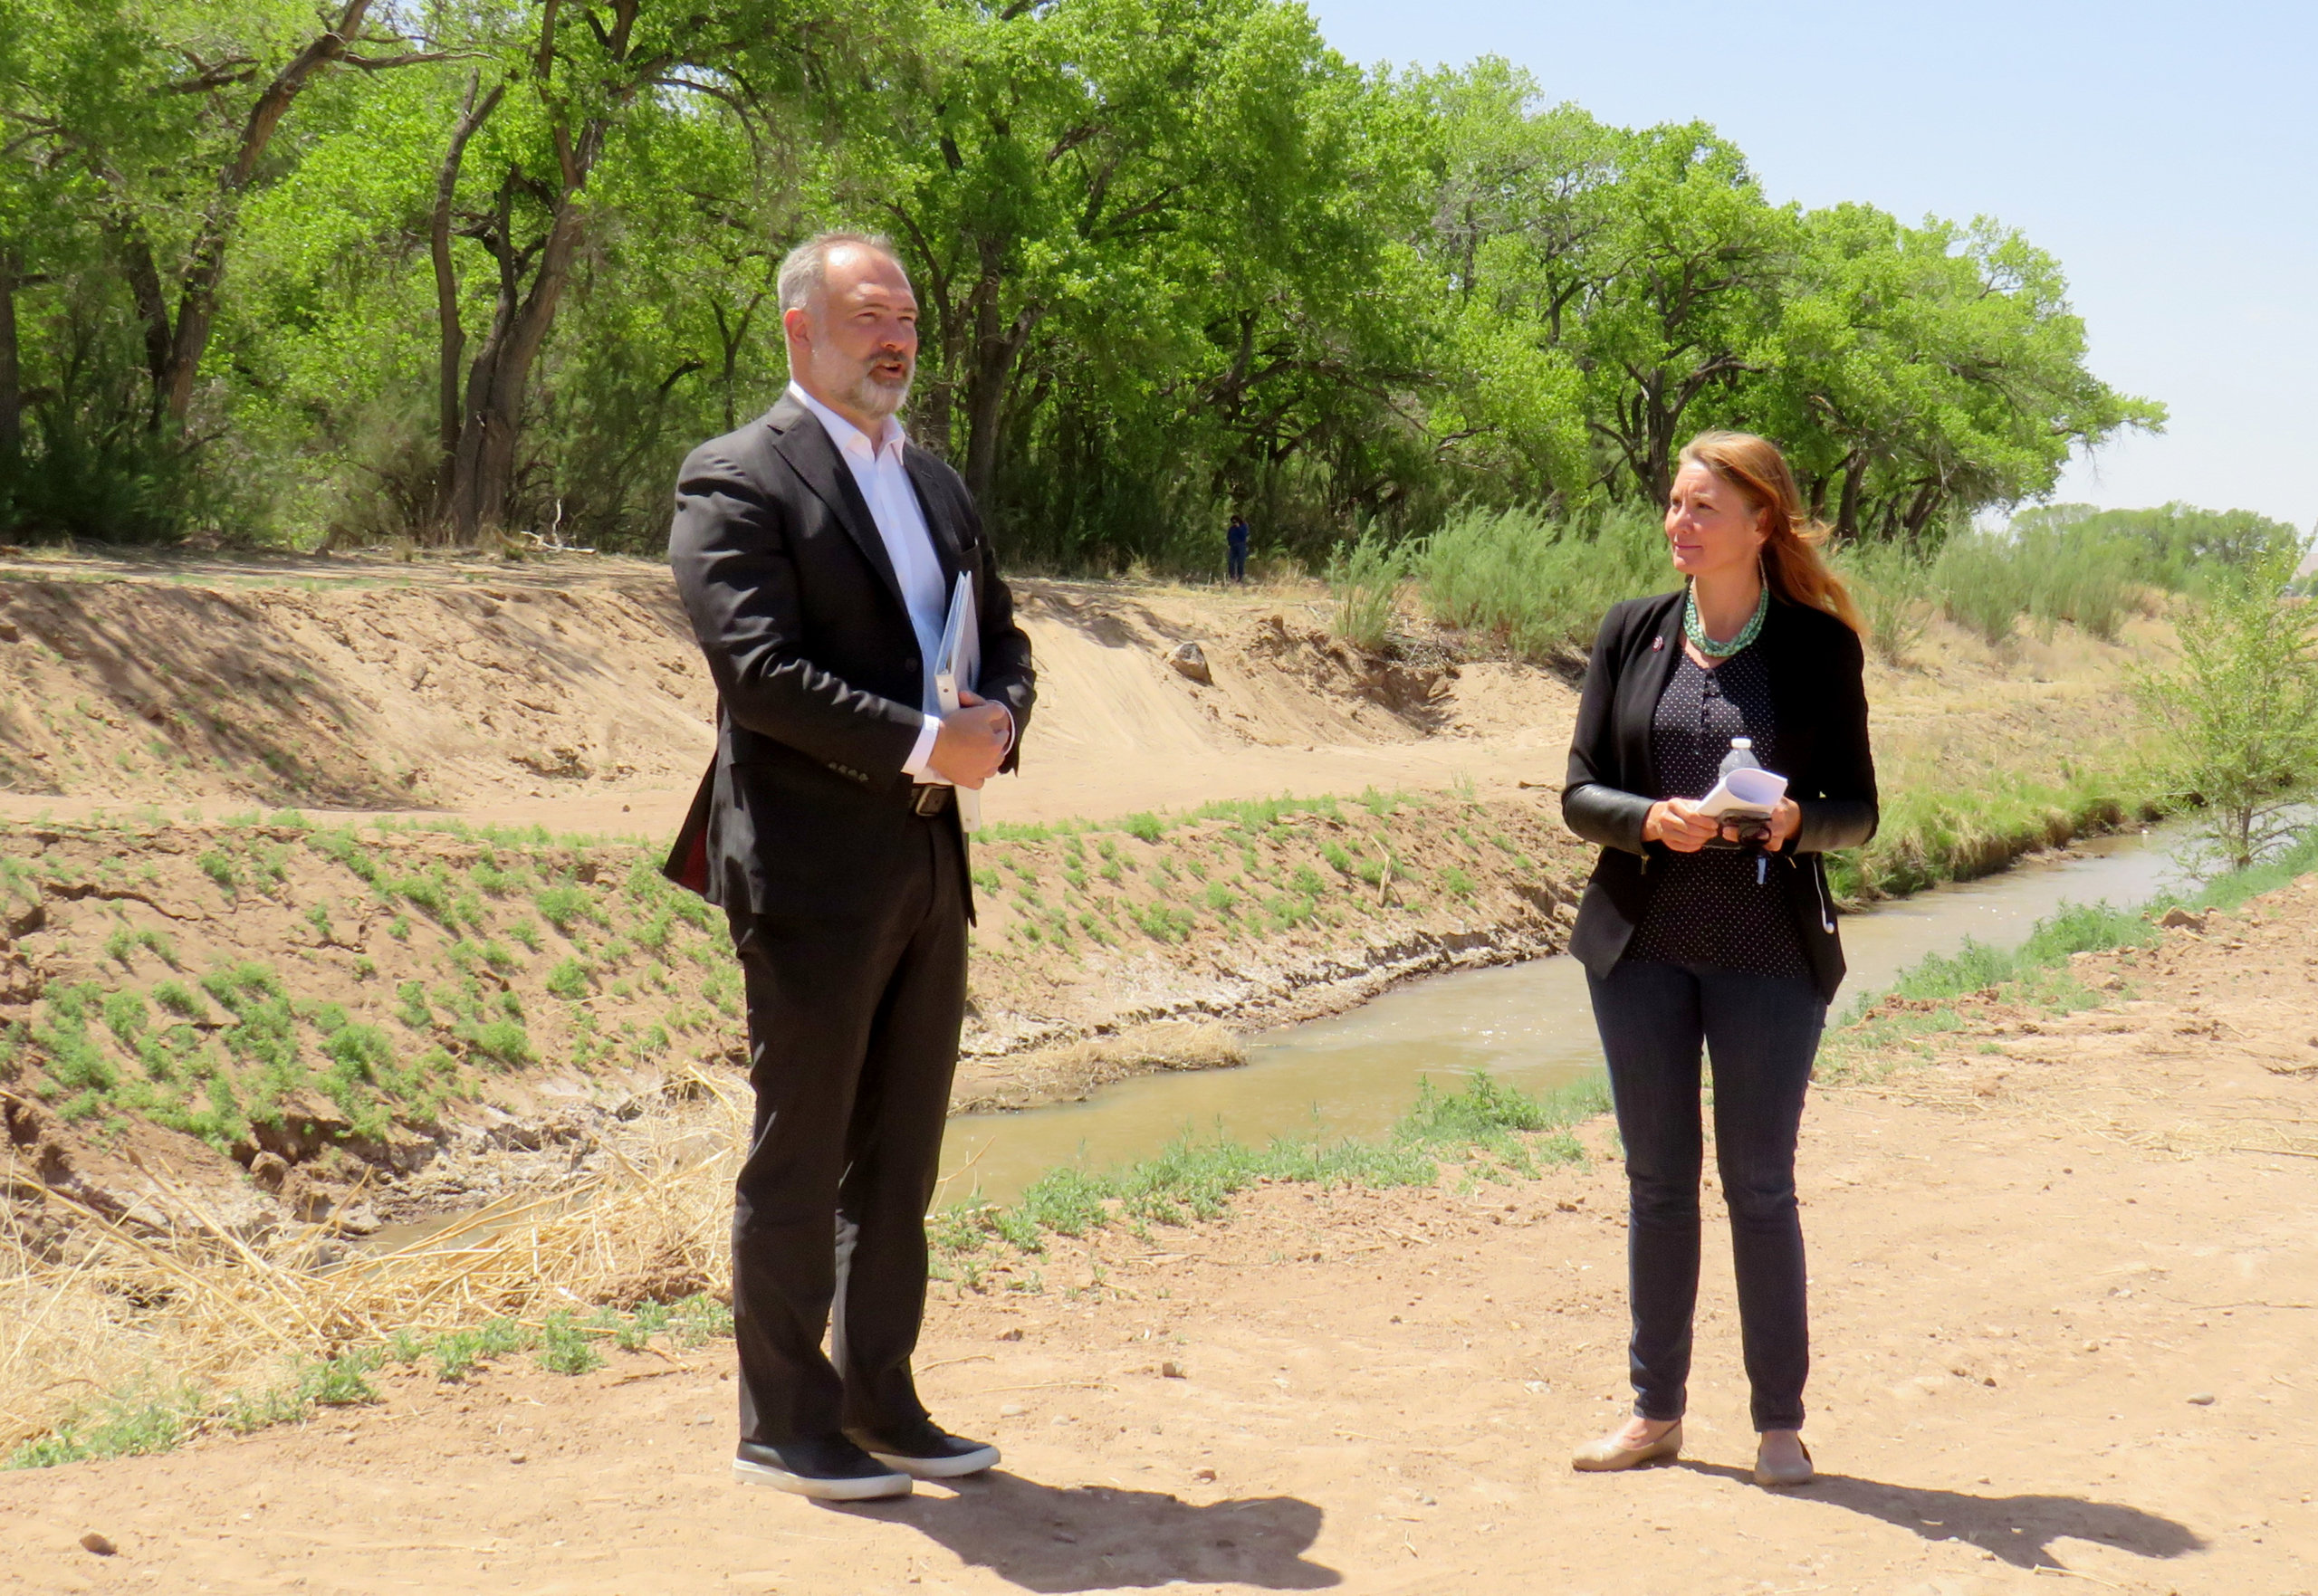 Deputy Interior Secretary discusses water infrastructure during visit to Belen